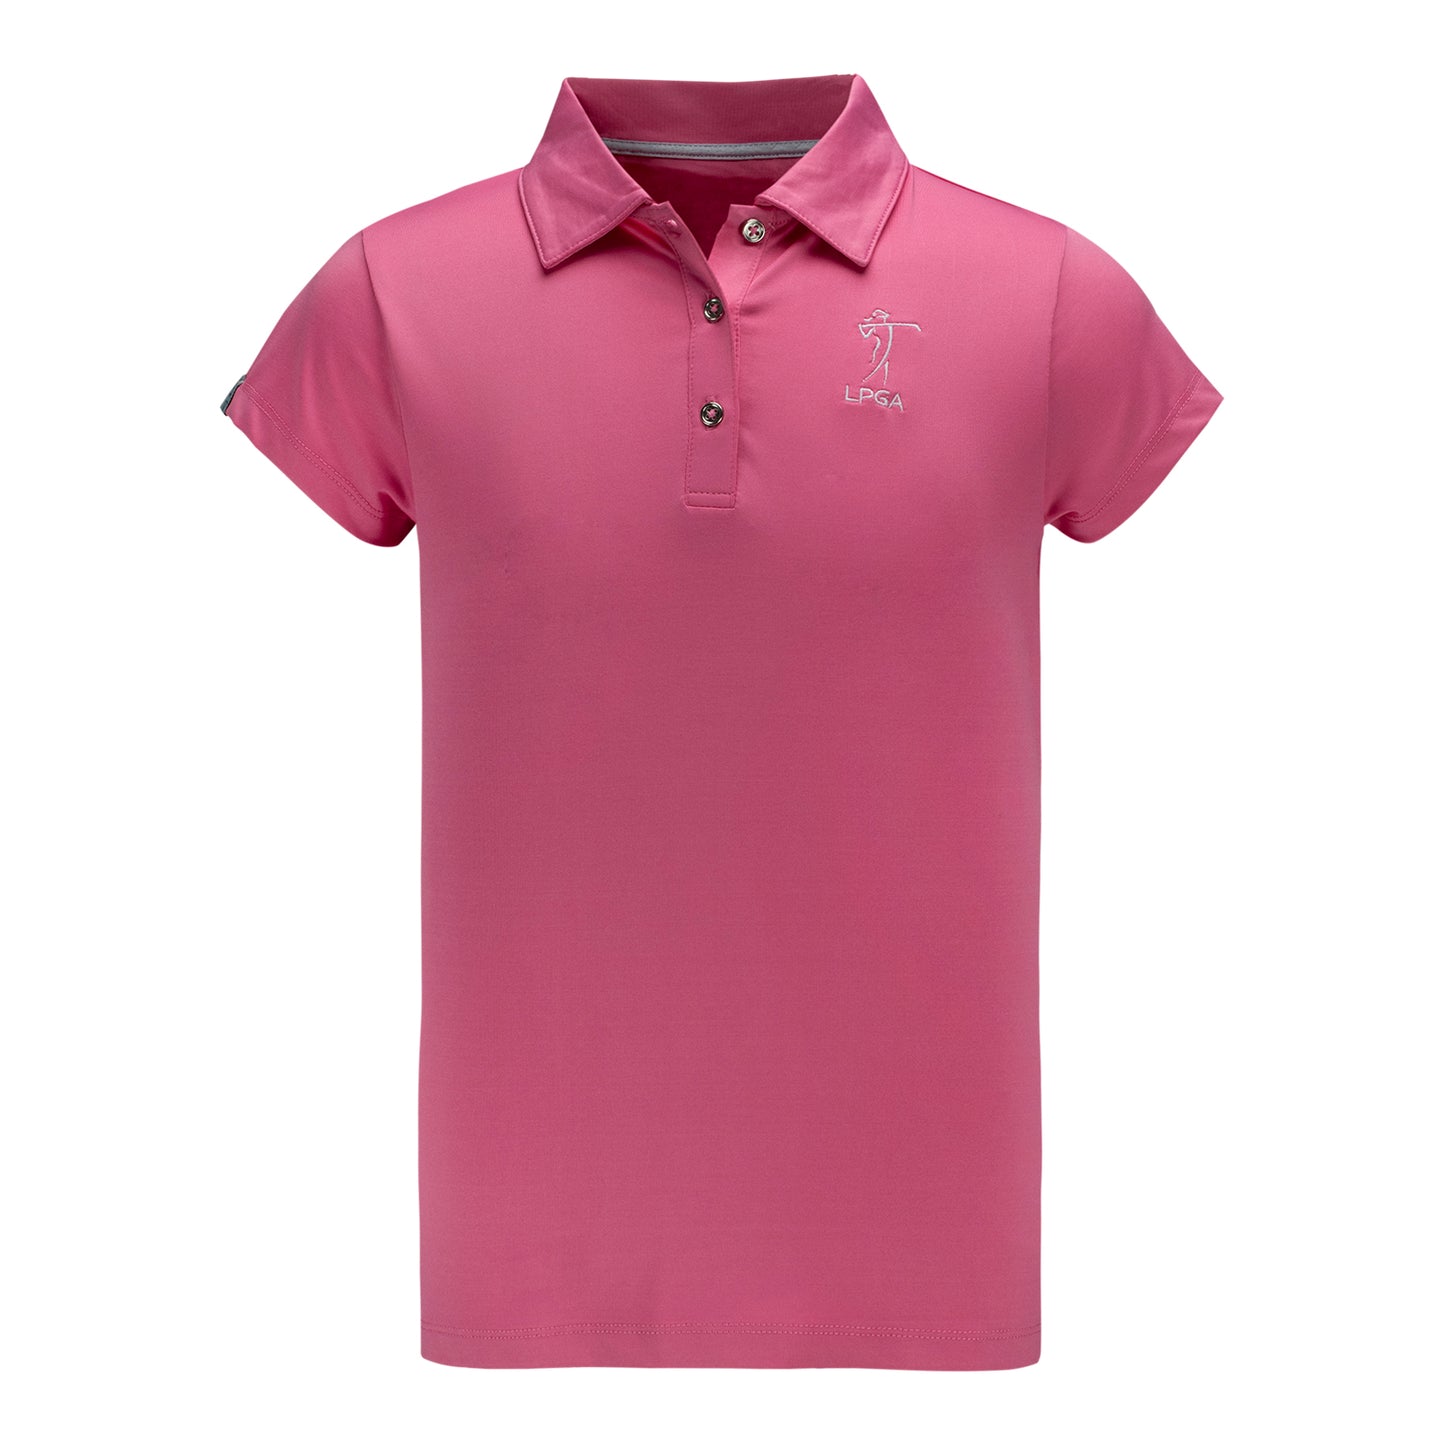 Garb LPGA Brighton Girls Youth Polo in Pink - Front View